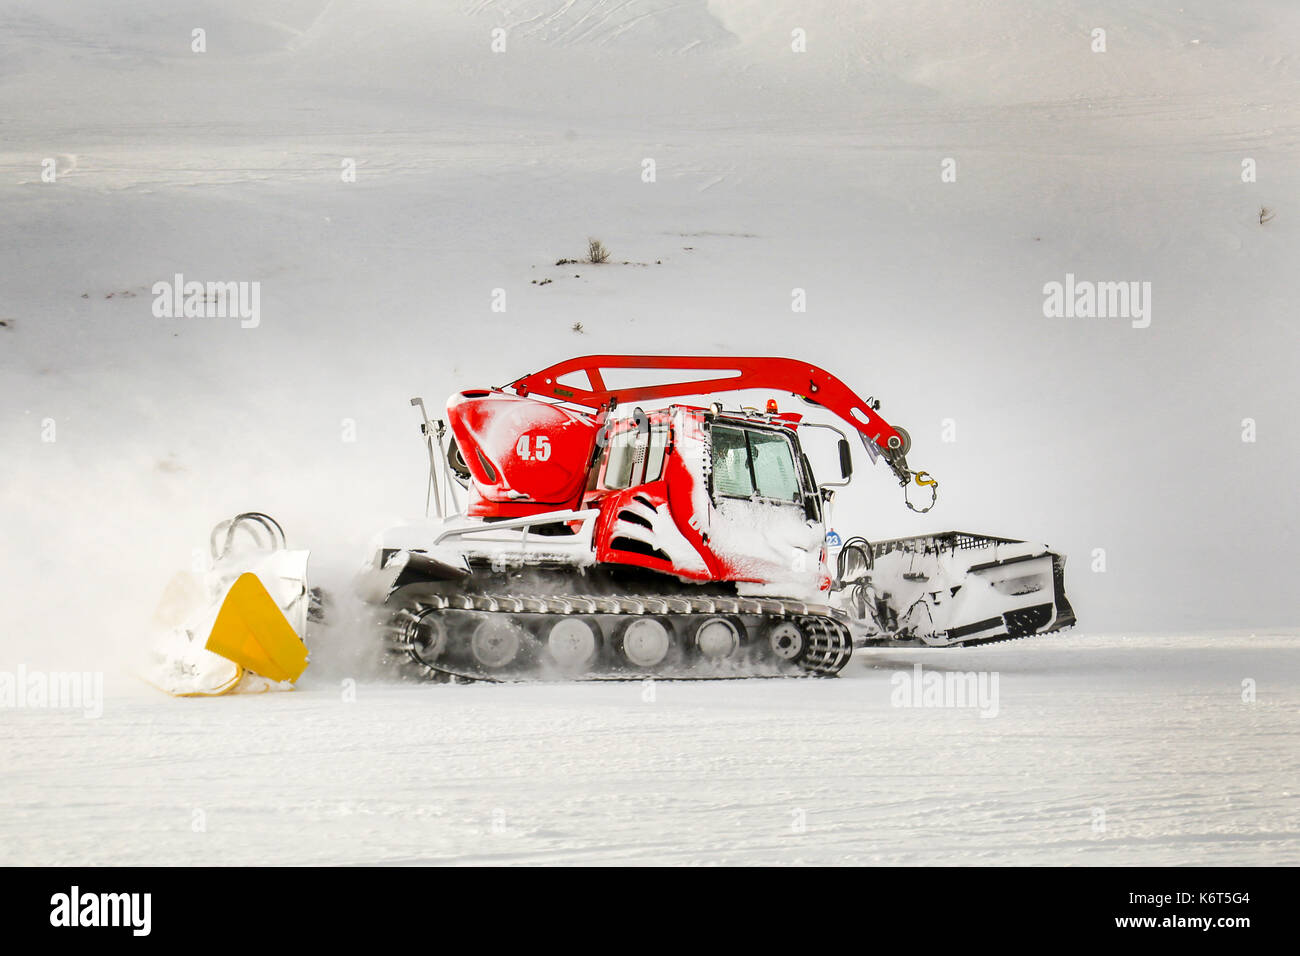 Ratrack,a snow grooming machine preparing slopes for skiers on a ski resort in mountains Stock Photo